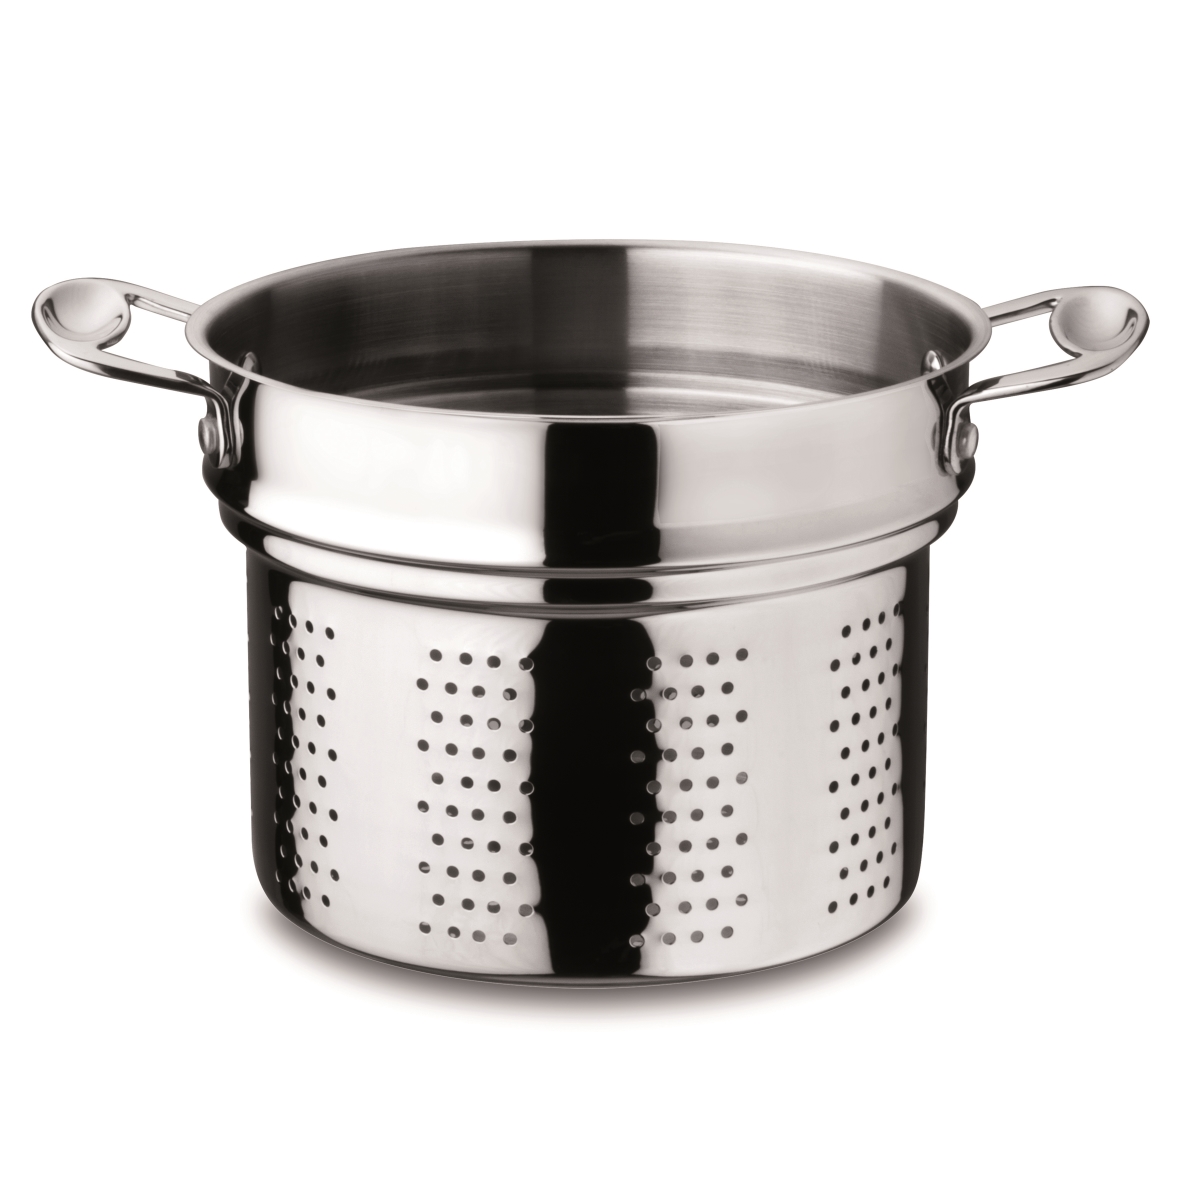 Picture of Mepra 30217222 18-10 Stainless Steel Glamour Diamond Stock Pot